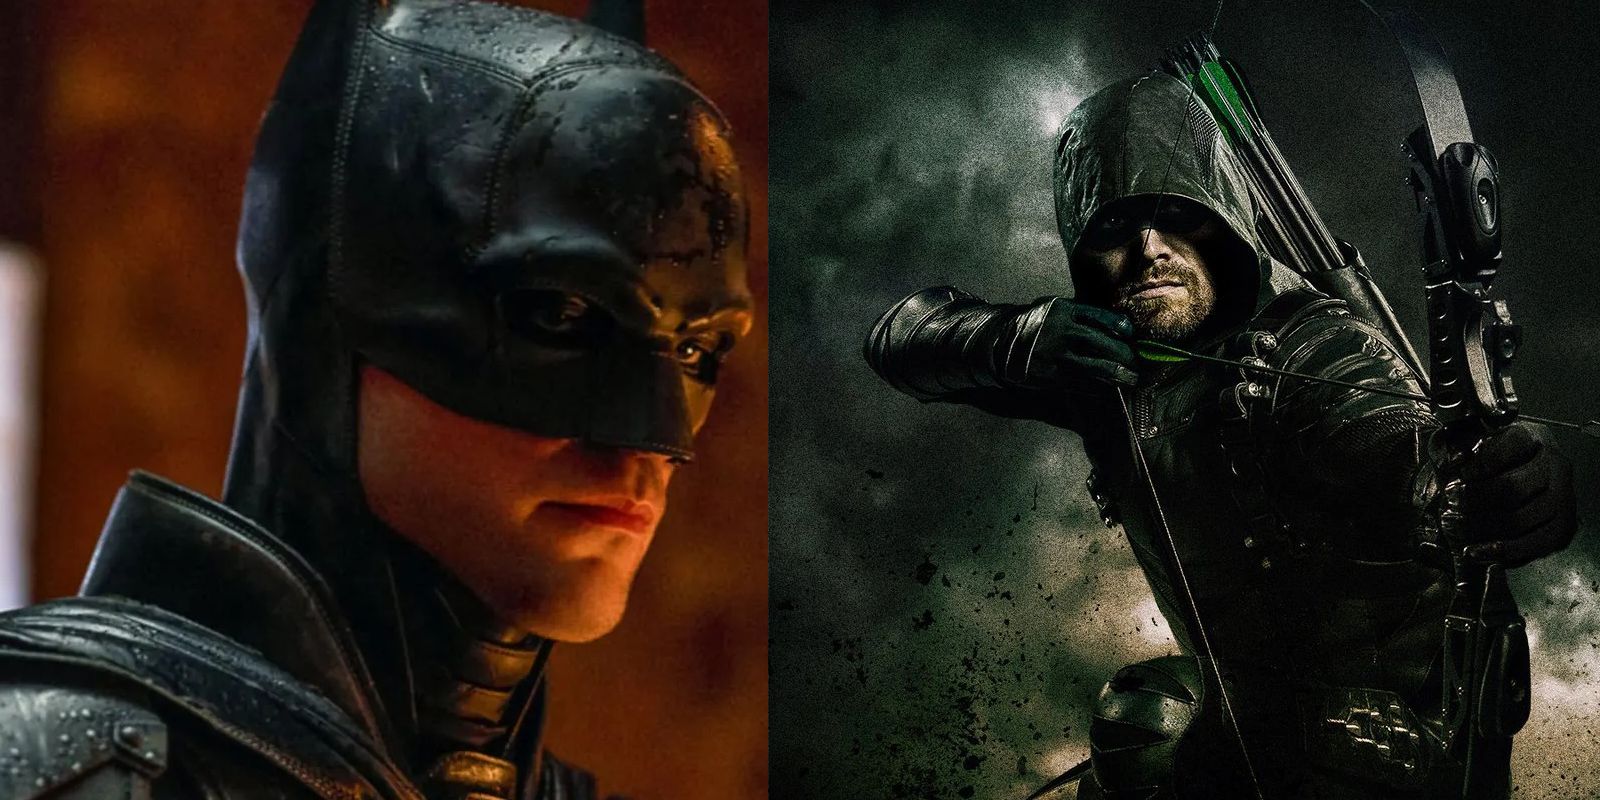 The Batman Characters & Their Arrowverse Counterparts